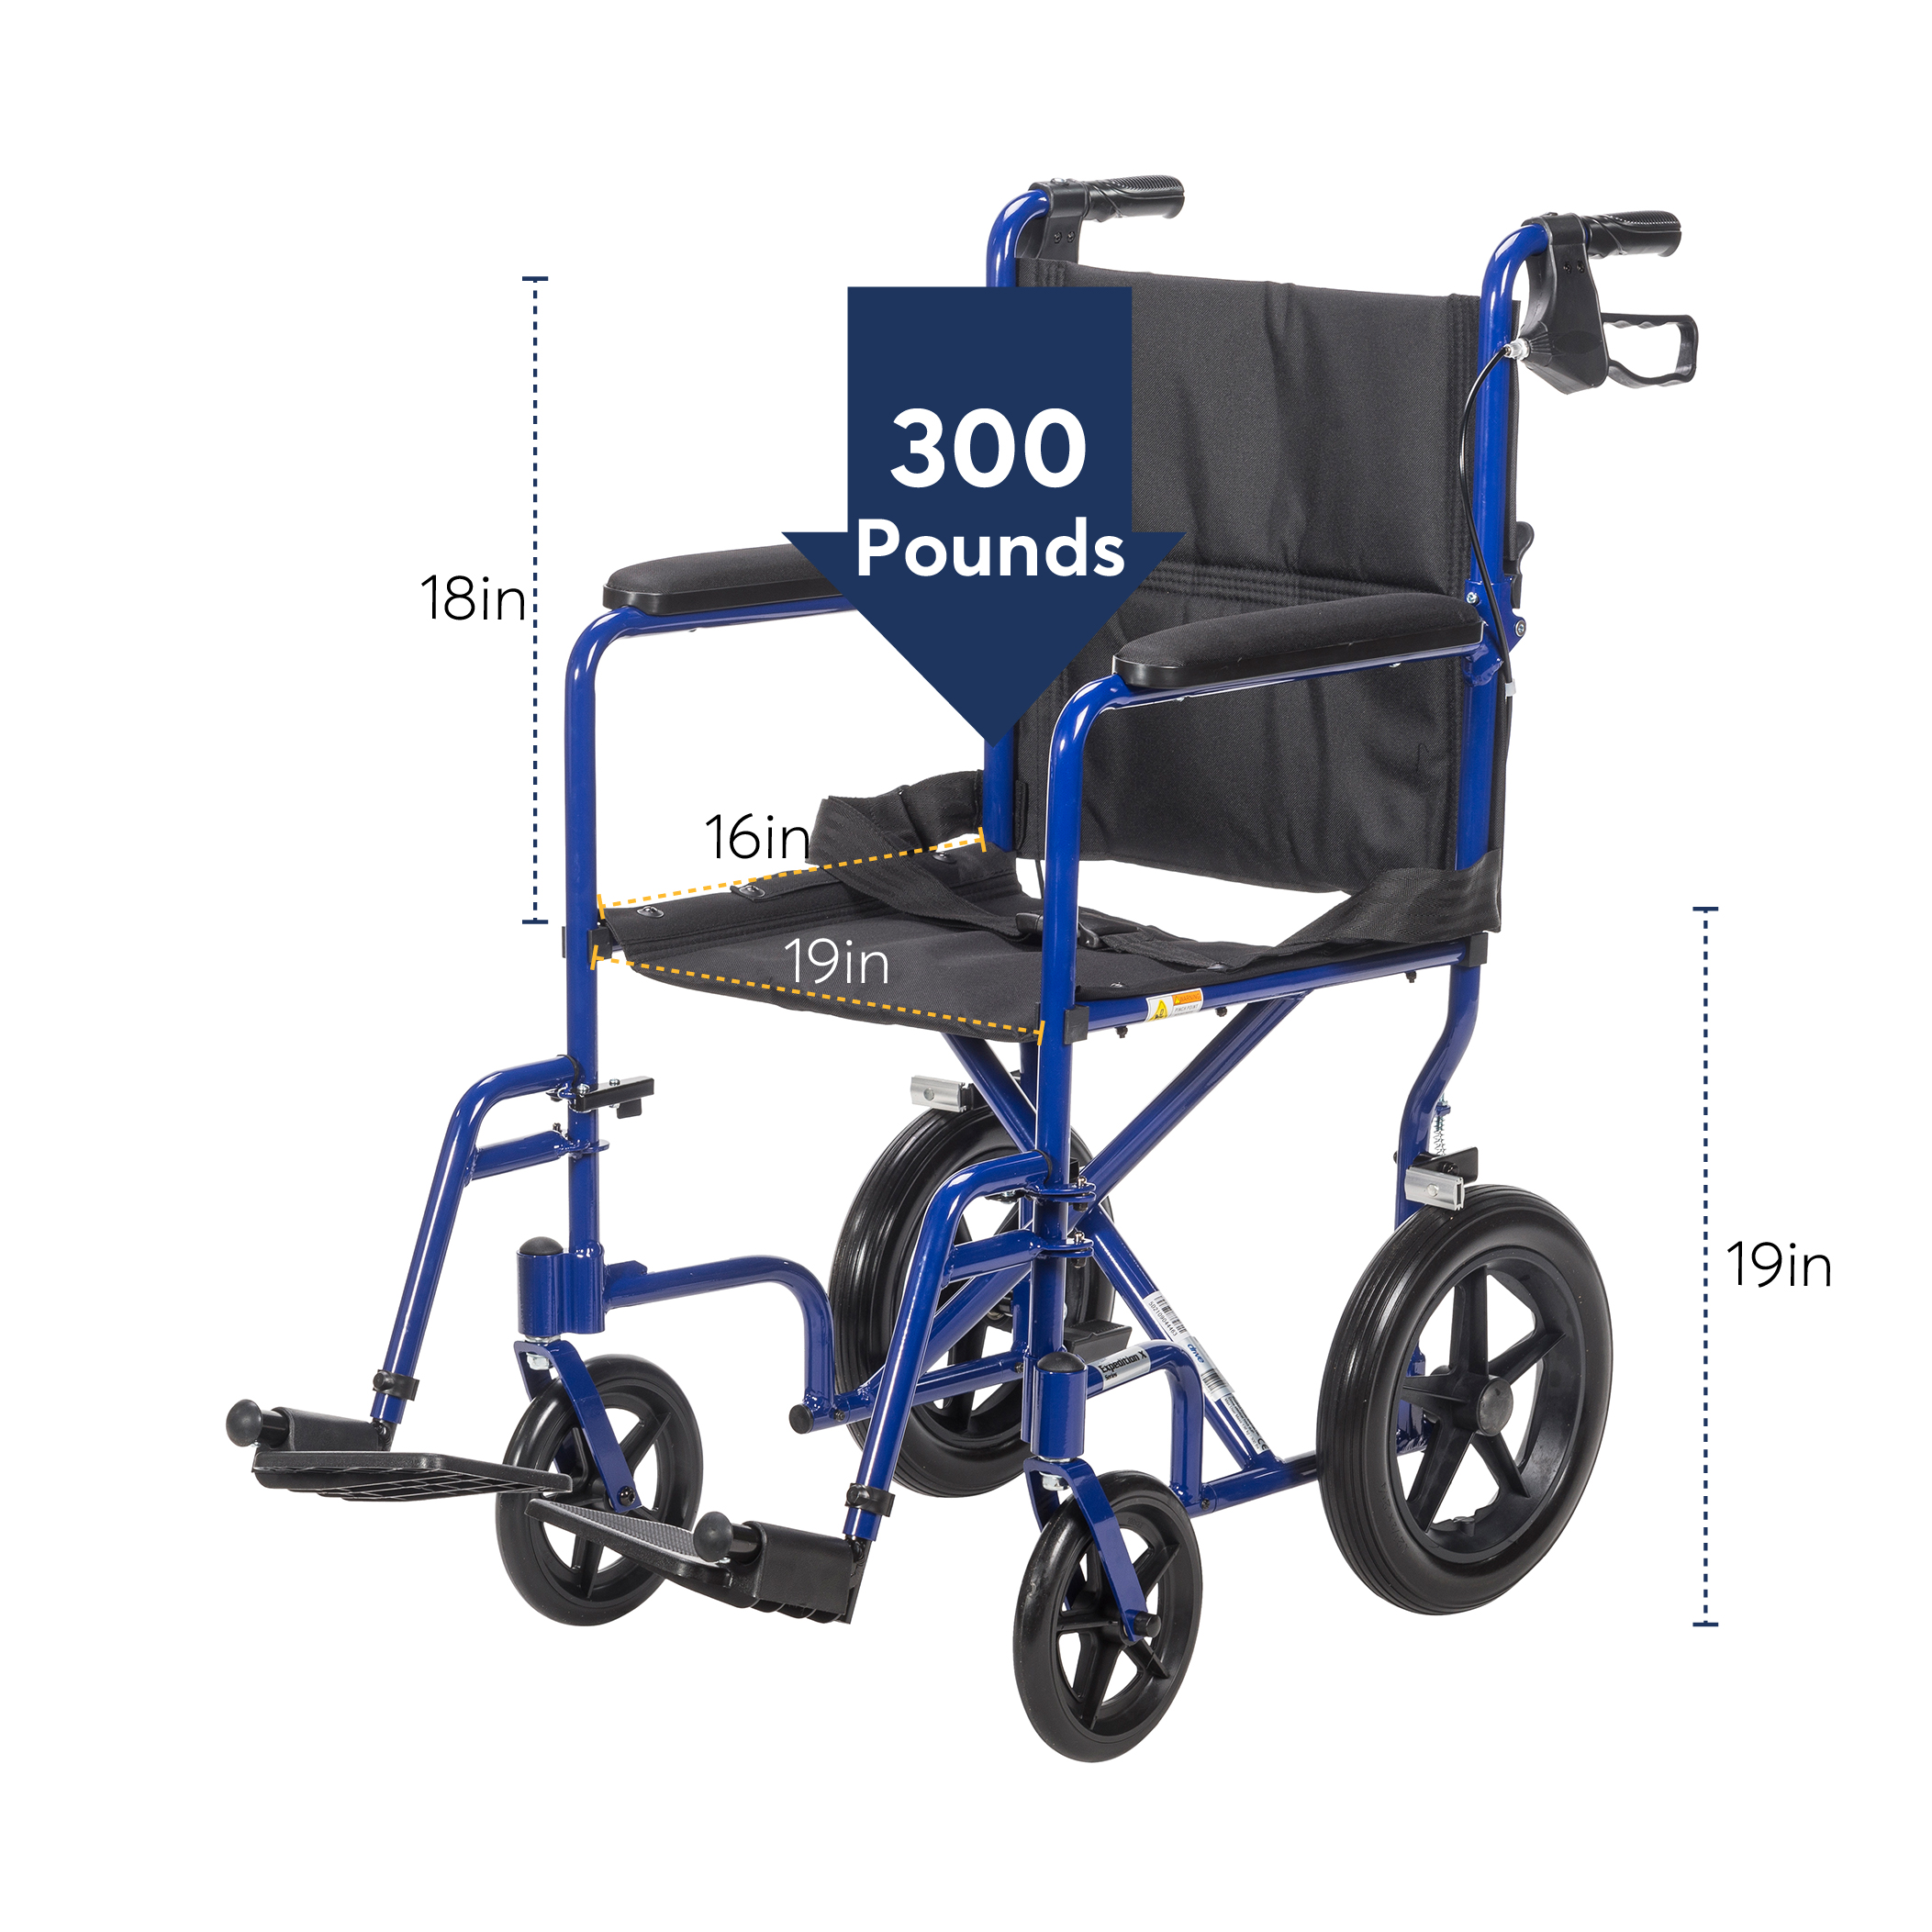 Drive Medical Lightweight Expedition Transport Wheelchair with Hand Brakes, Blue, 19" Seat - image 2 of 6